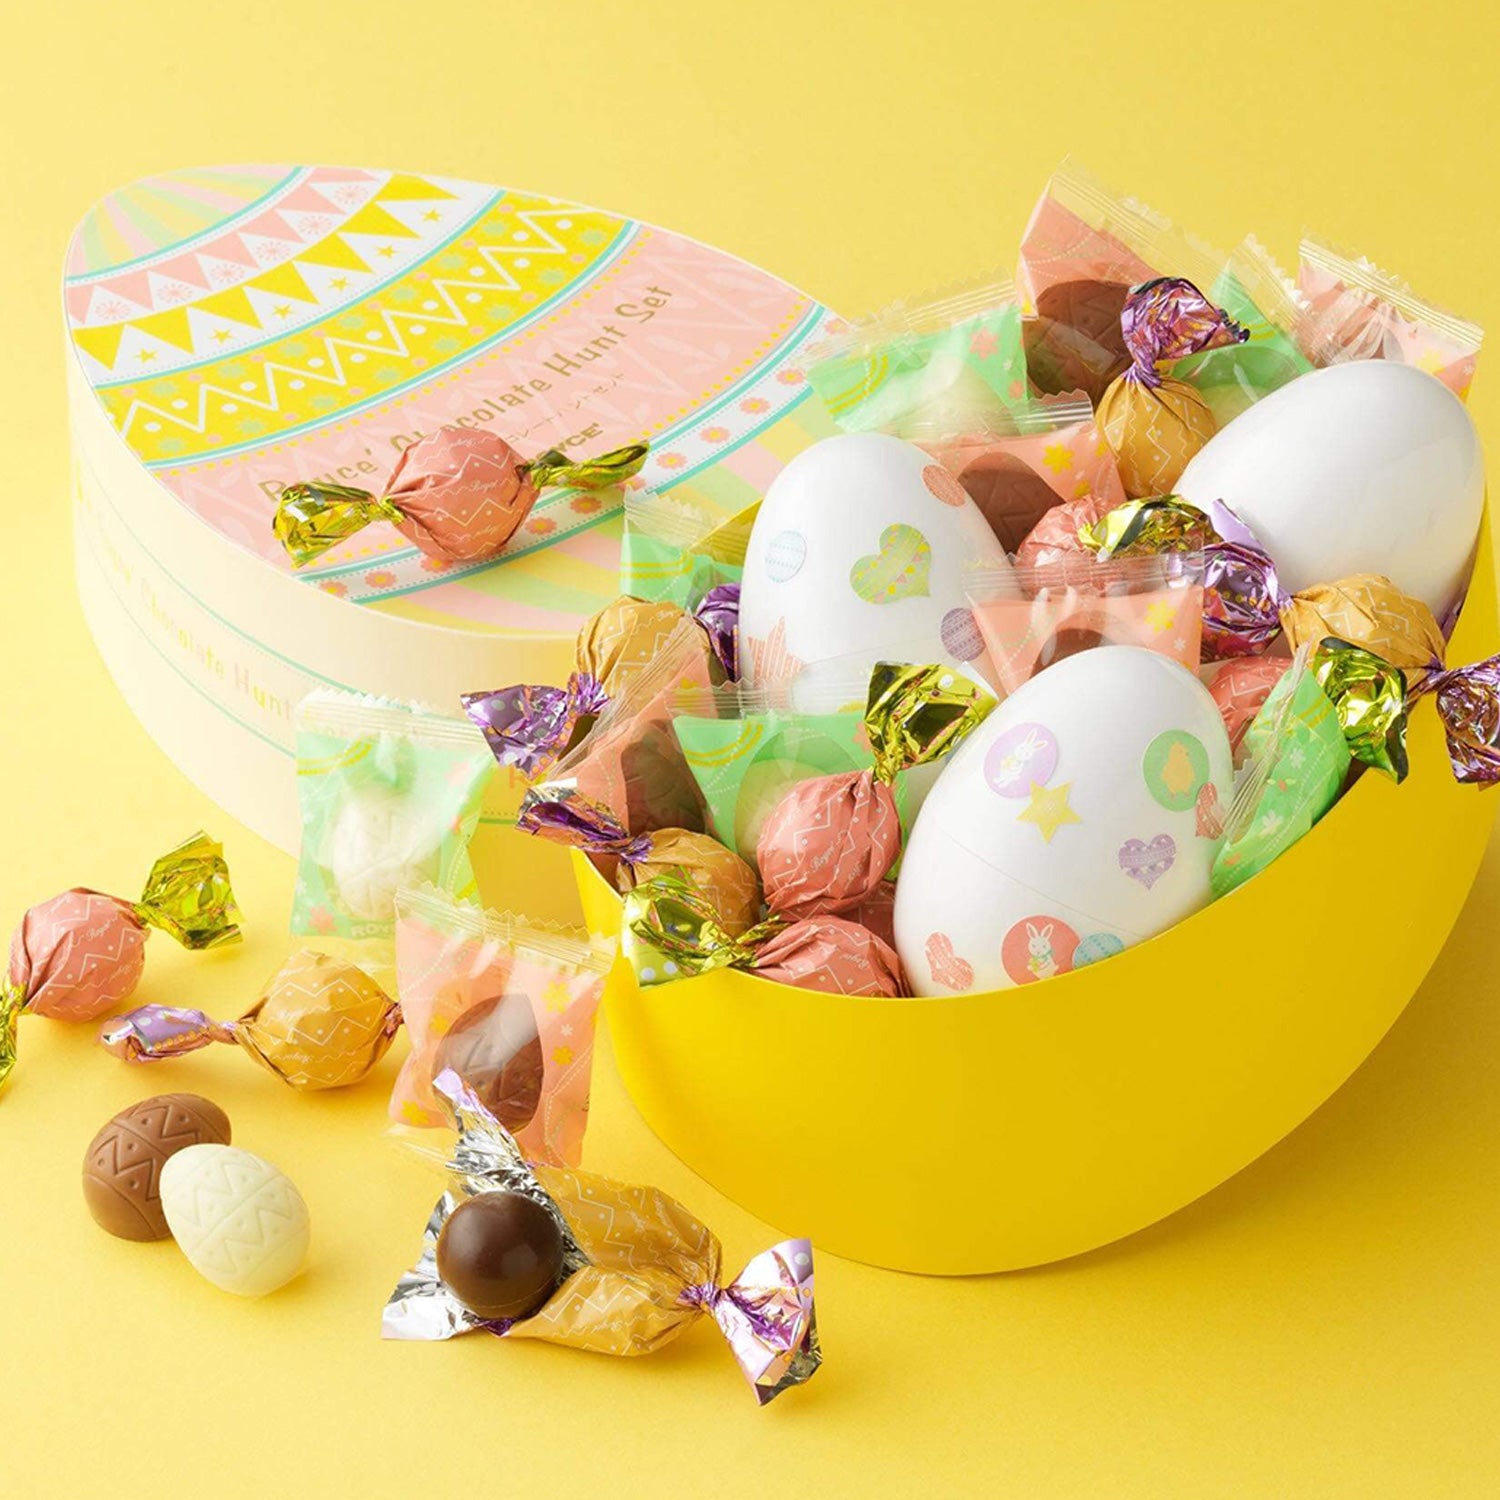 ROYCE' Chocolate - ROYCE' Chocolate Hunt Set - Image shows two egg-shaped boxes with a yellow background. Printed box on upper left has text saying ROYCE' Chocolate. Yellow box on right has printed plastic eggs and a variety of confections in different colors and sizes.